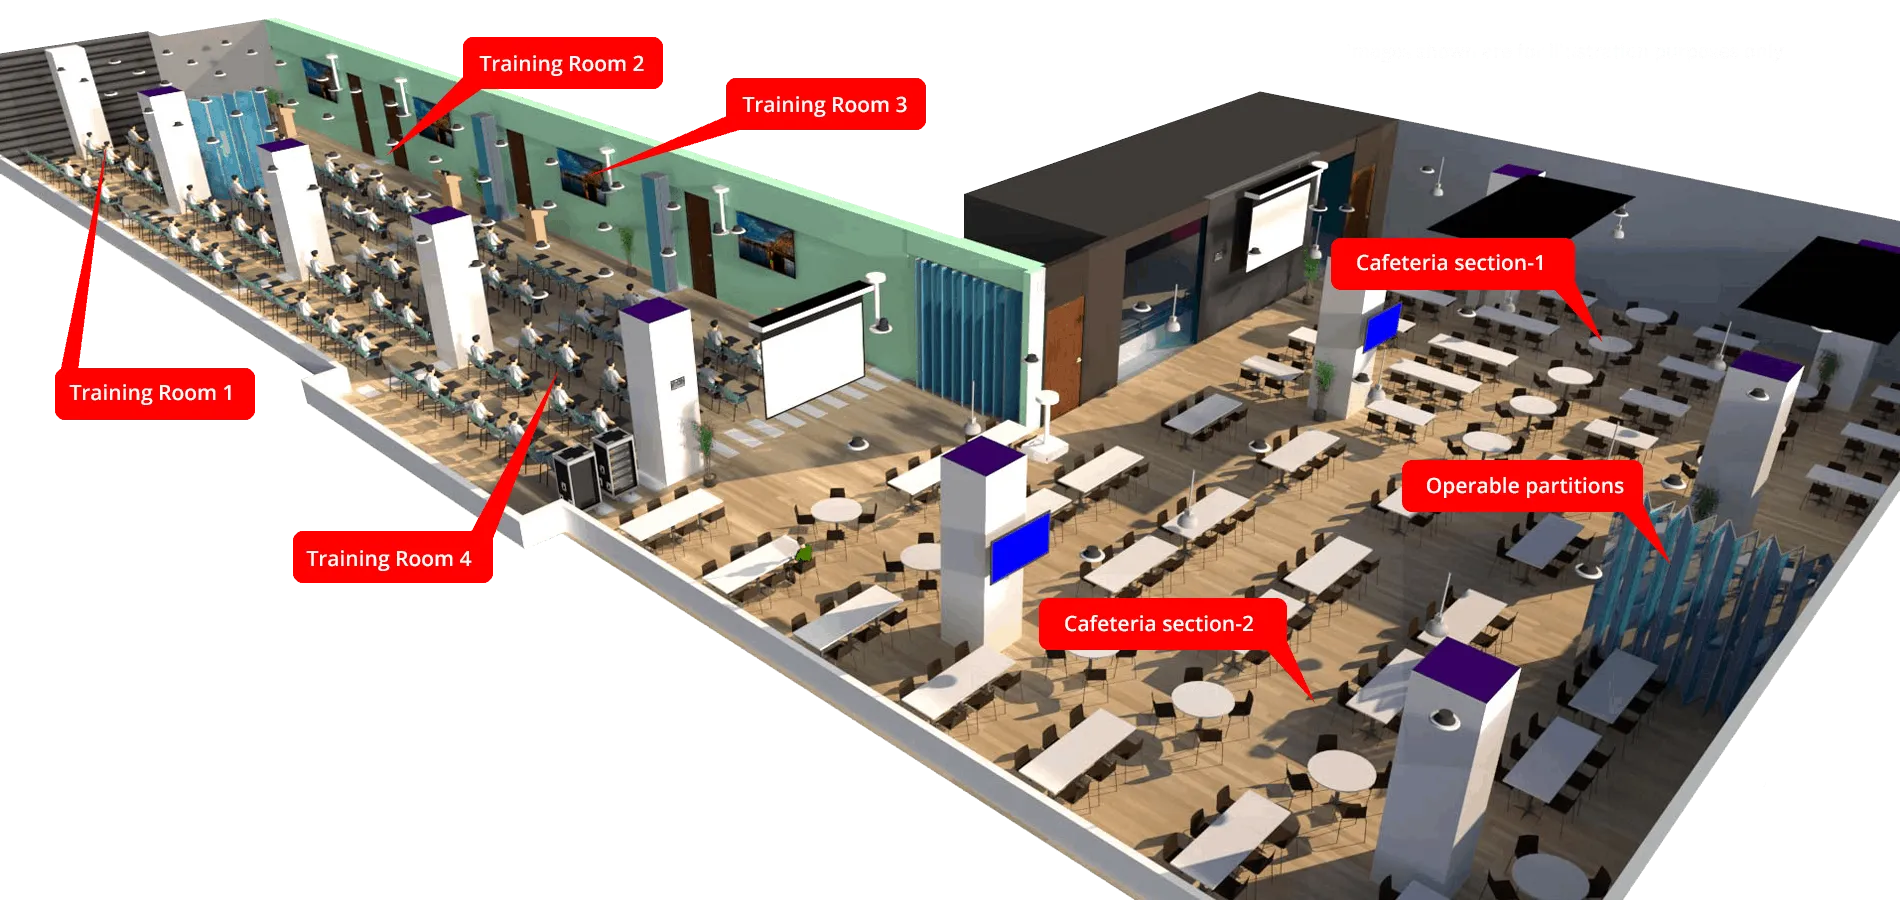 THE MULTI-PURPOSE CAFETERIA – HAS 2 DIVISIBLE SECTIONS AND CAN BE COMBINED WITH 4 ADJACENT TRAINING ROOMS